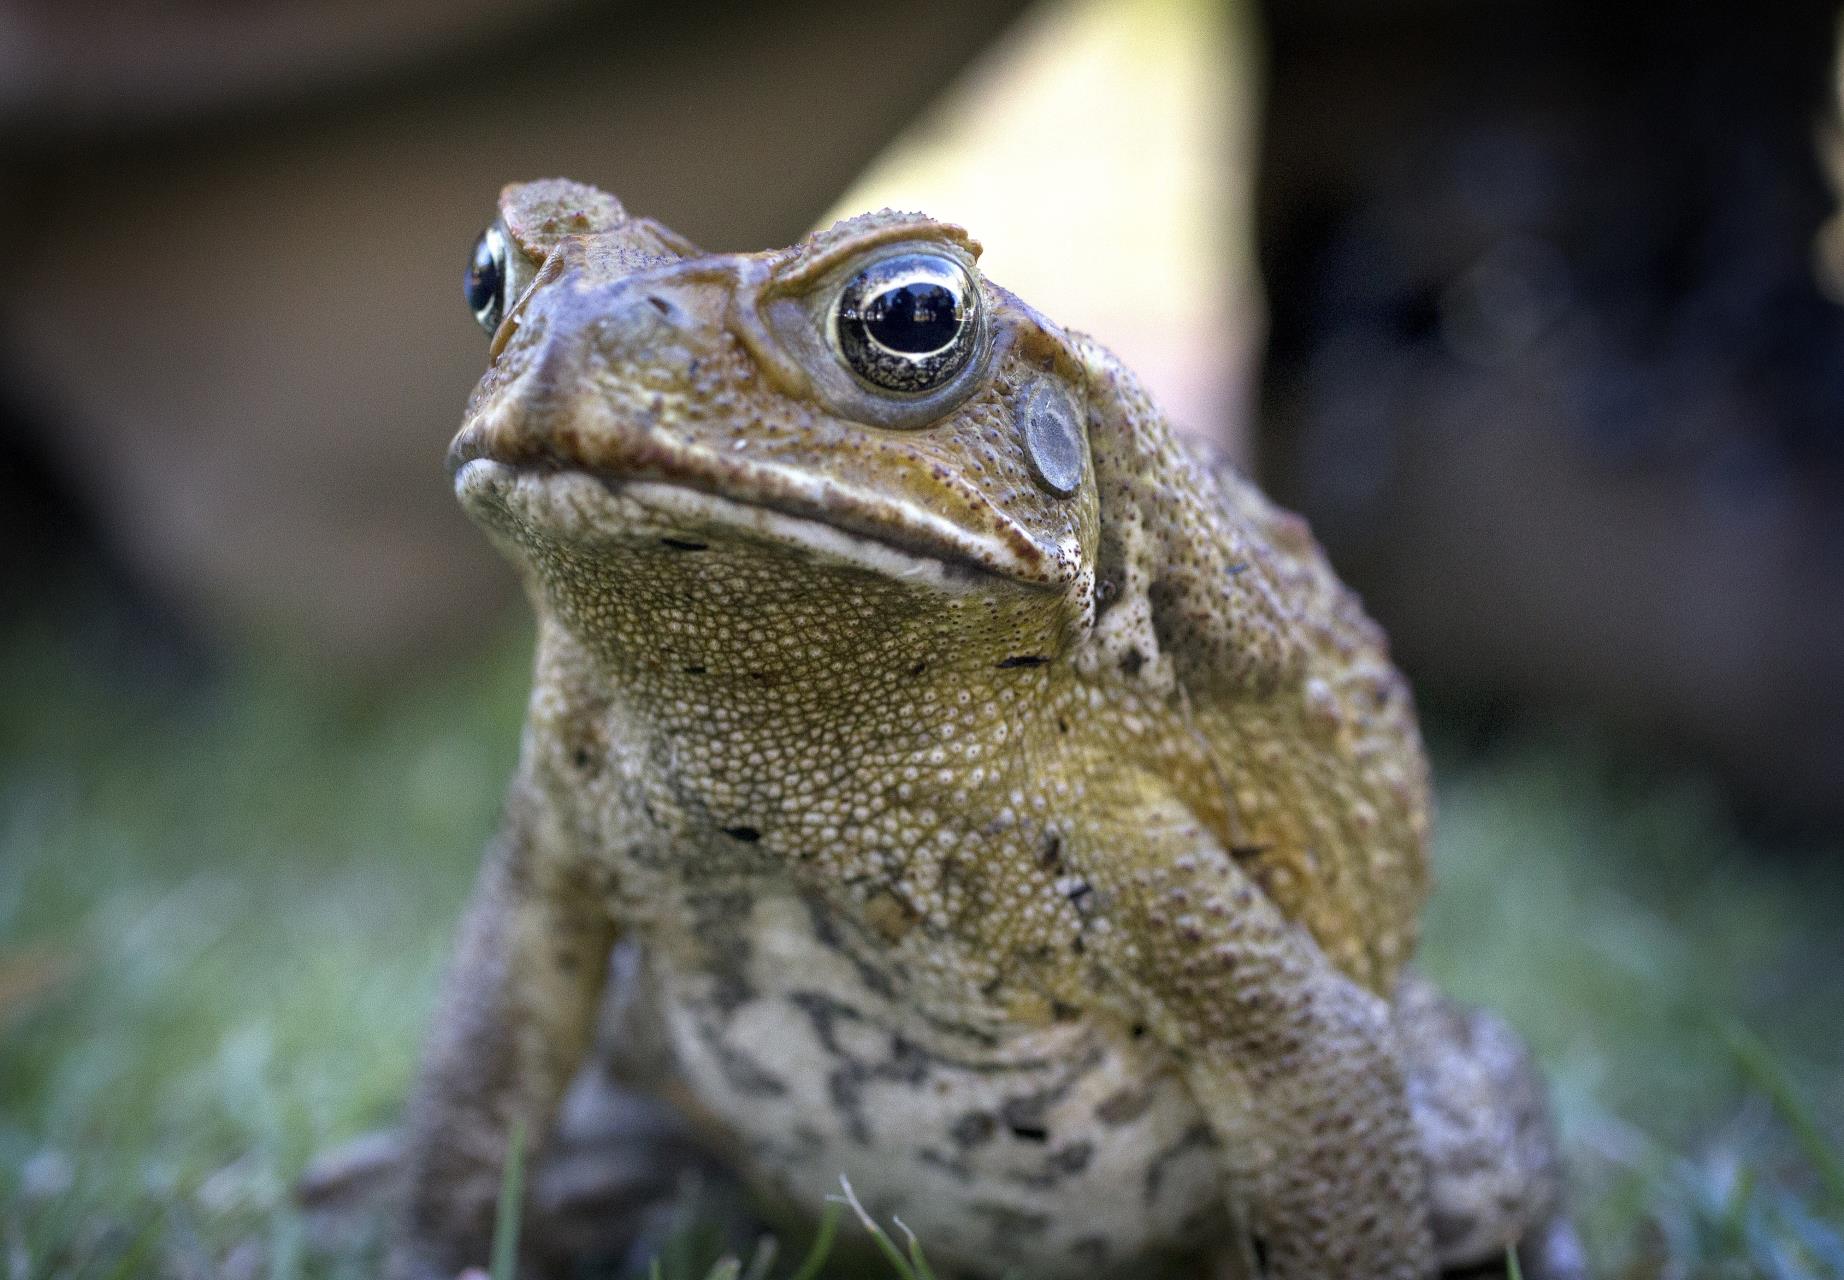 Derby Landcare Group working to control cane toads in Derby